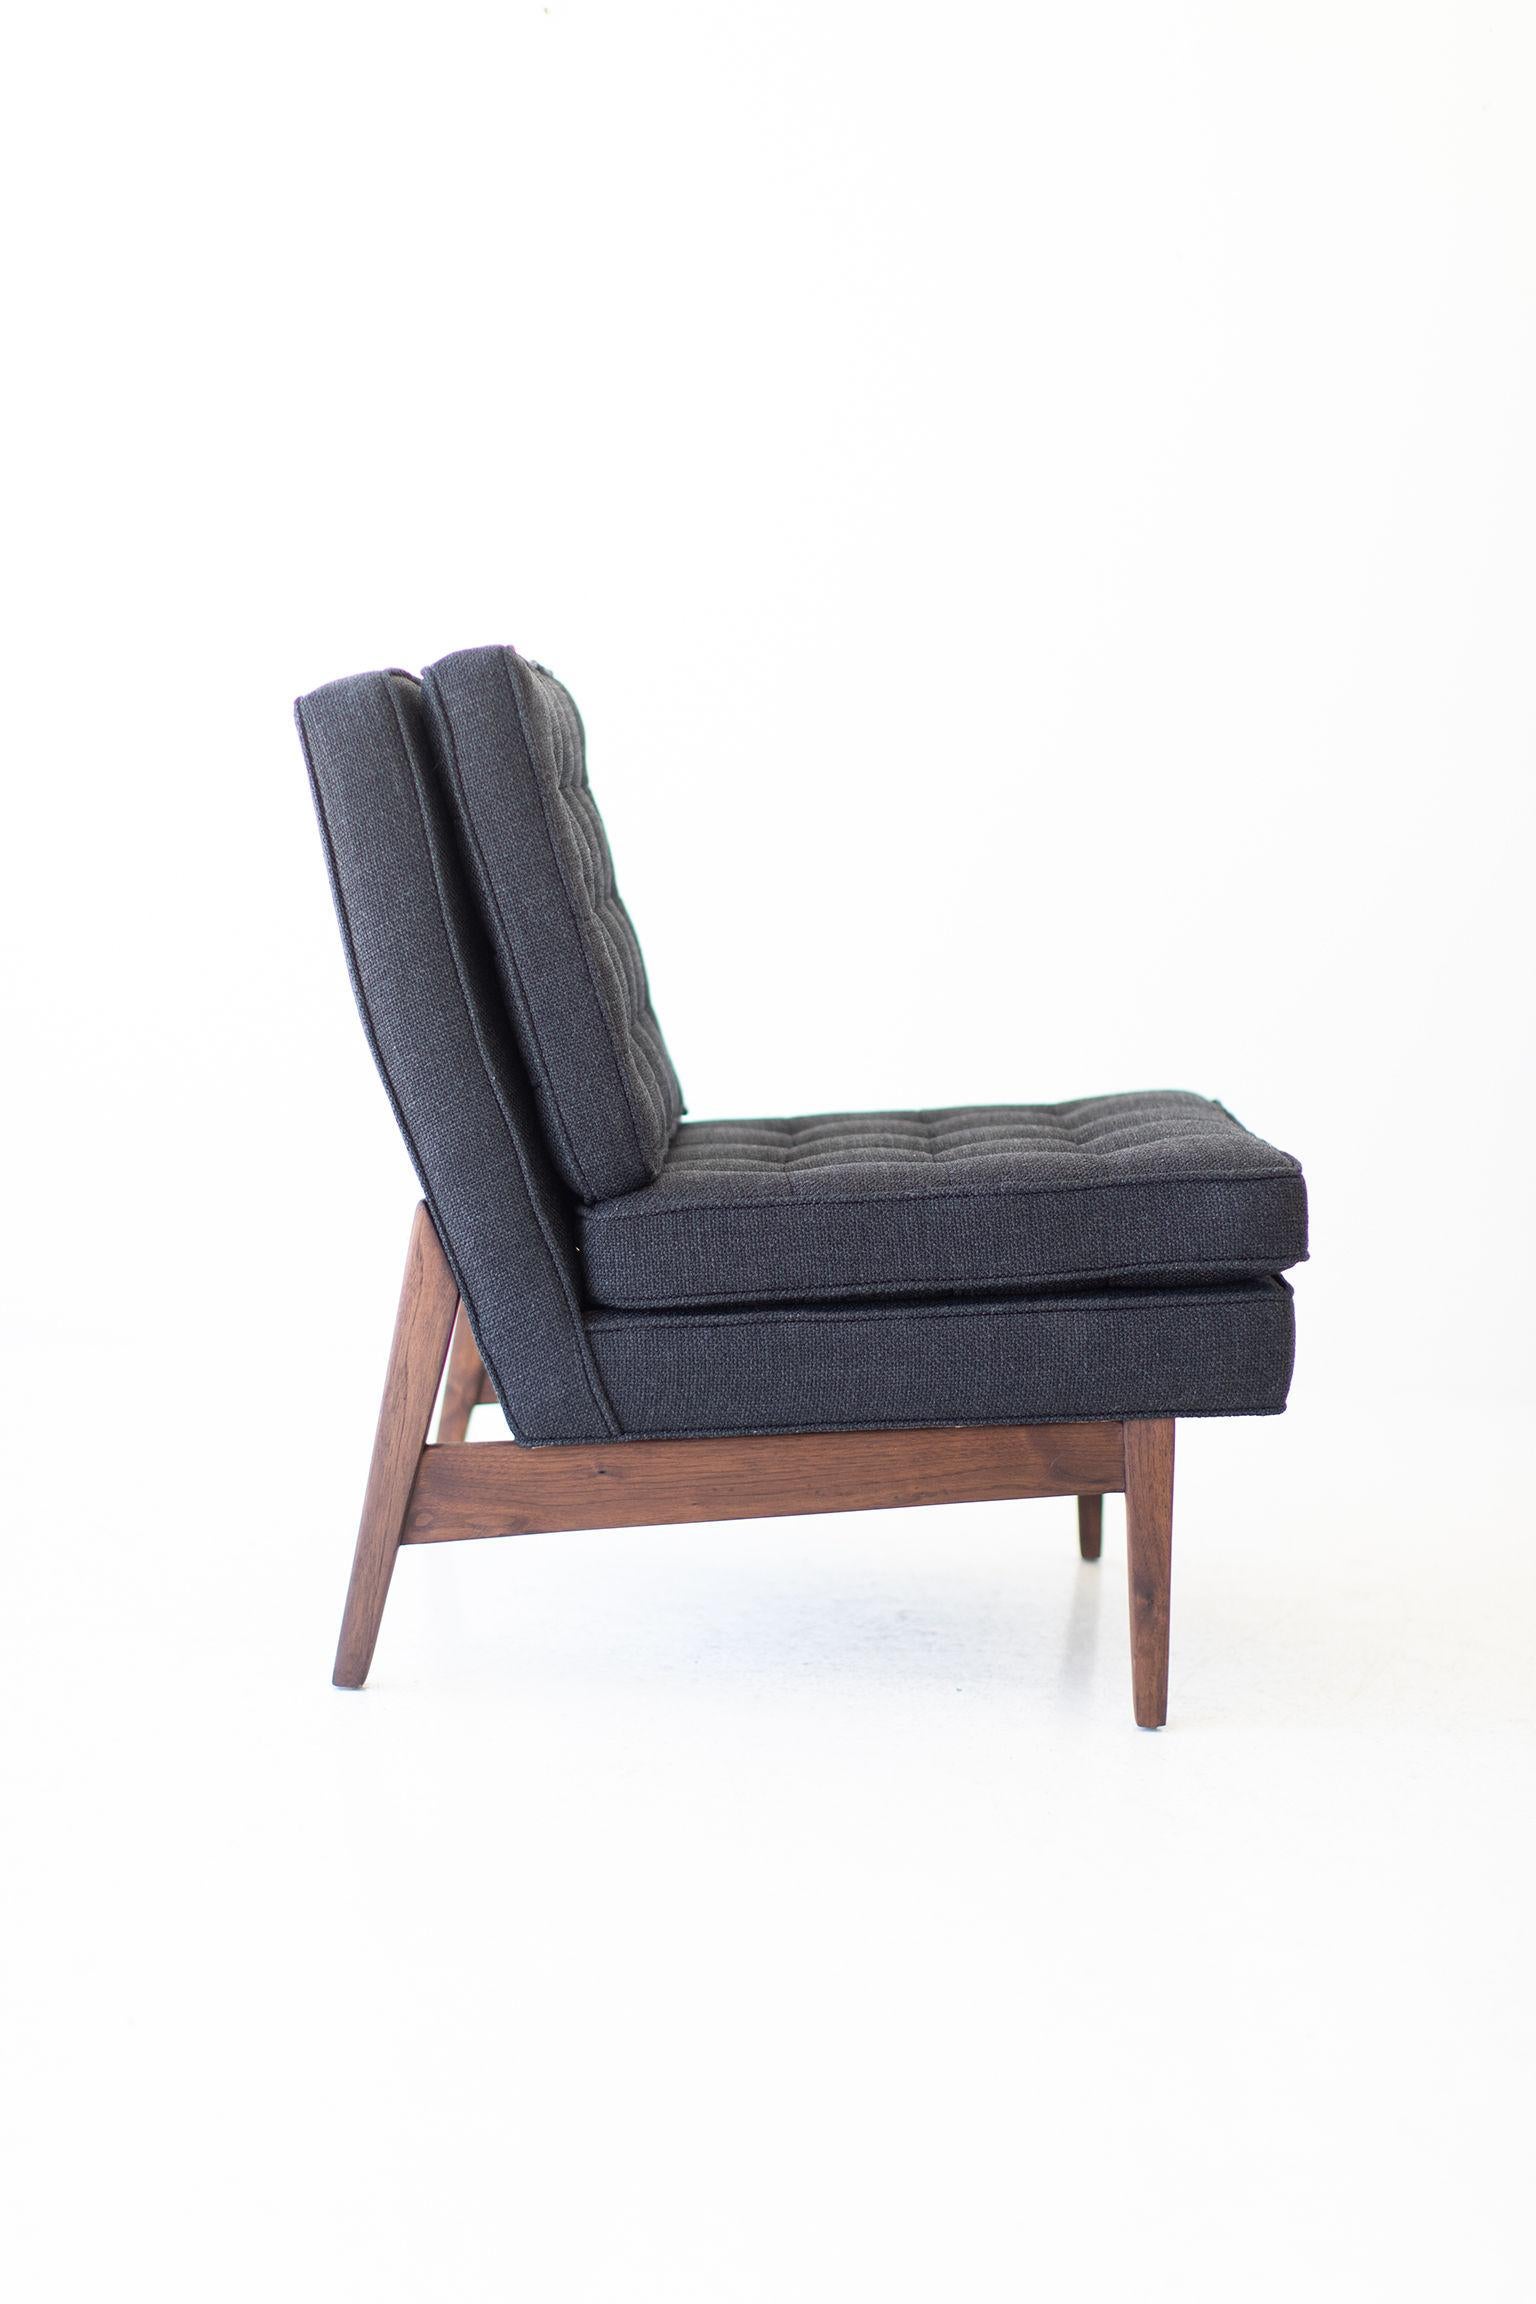 Mid-Century Modern Jack Cartwright Slipper Chair for Founders Furniture